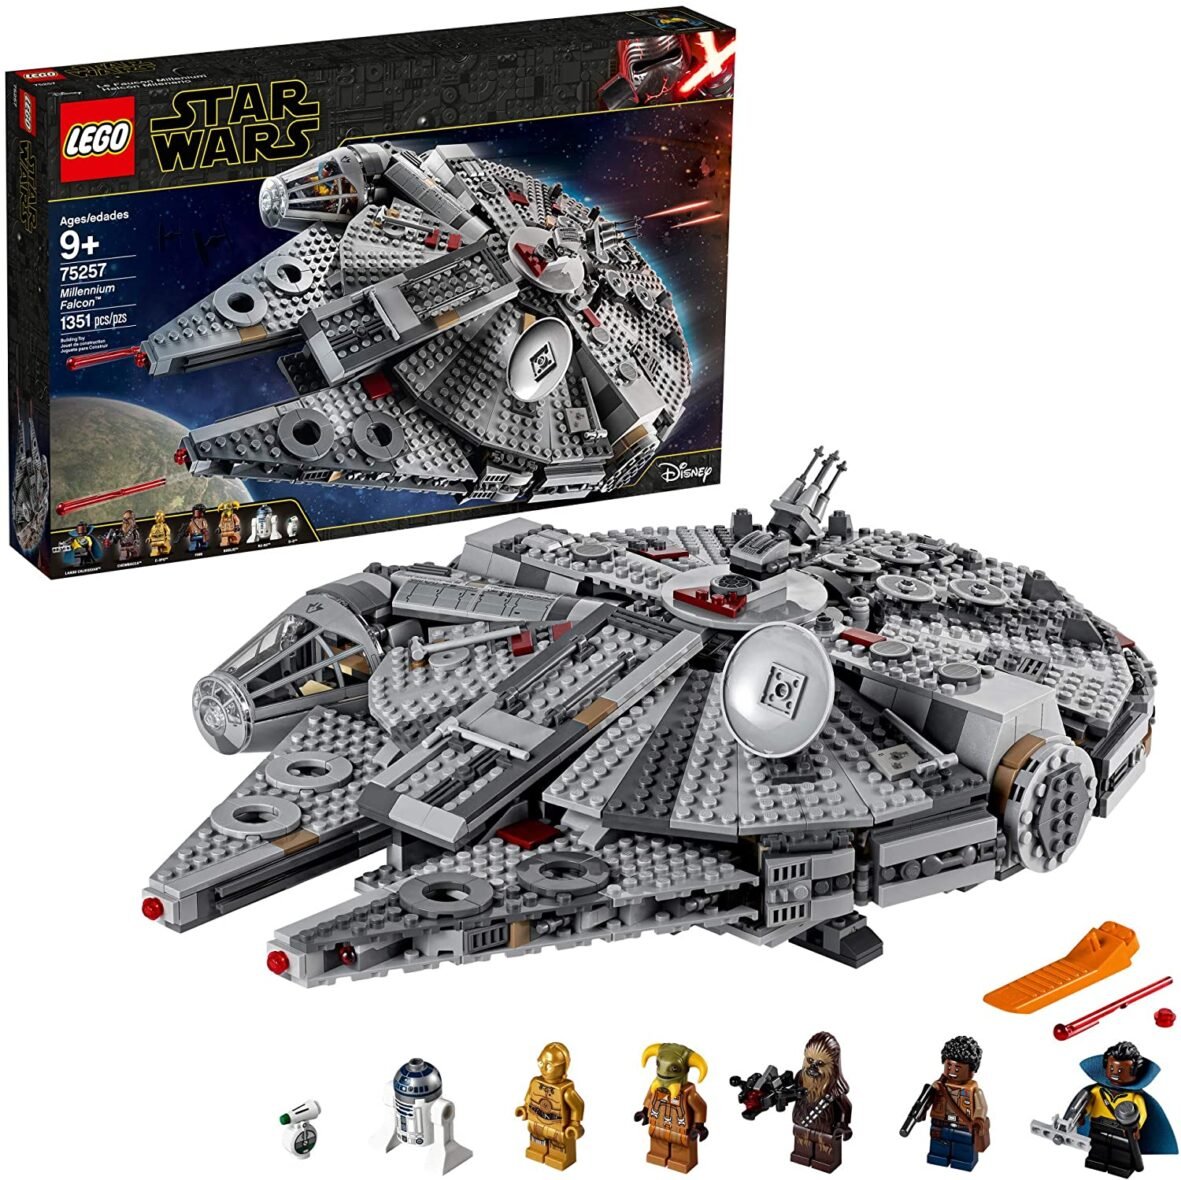 LEGO Star Wars: The Rise of Skywalker Millennium Falcon 75257 Building Kit and (1,351 Pieces)